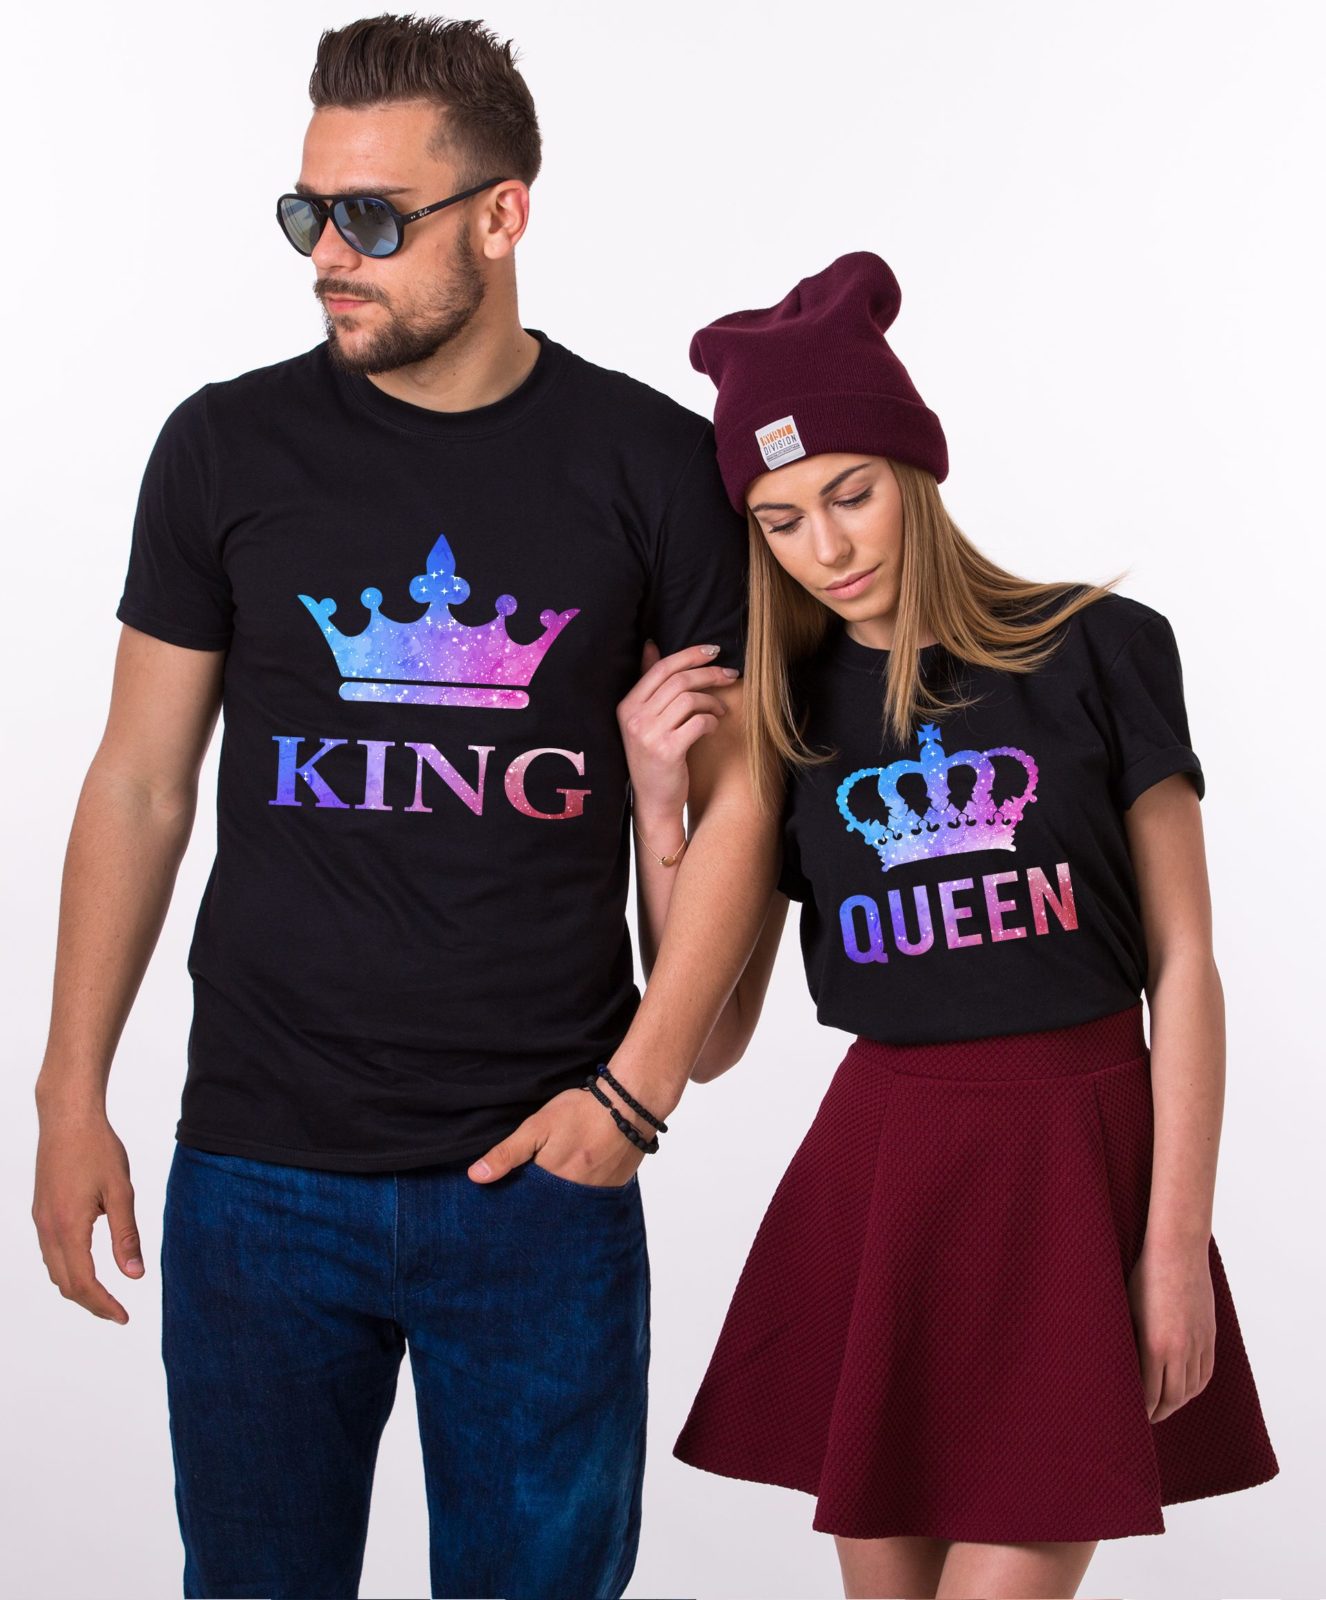 King and Queen Galaxy Shirts, Crowns, Matching Couples Shirts